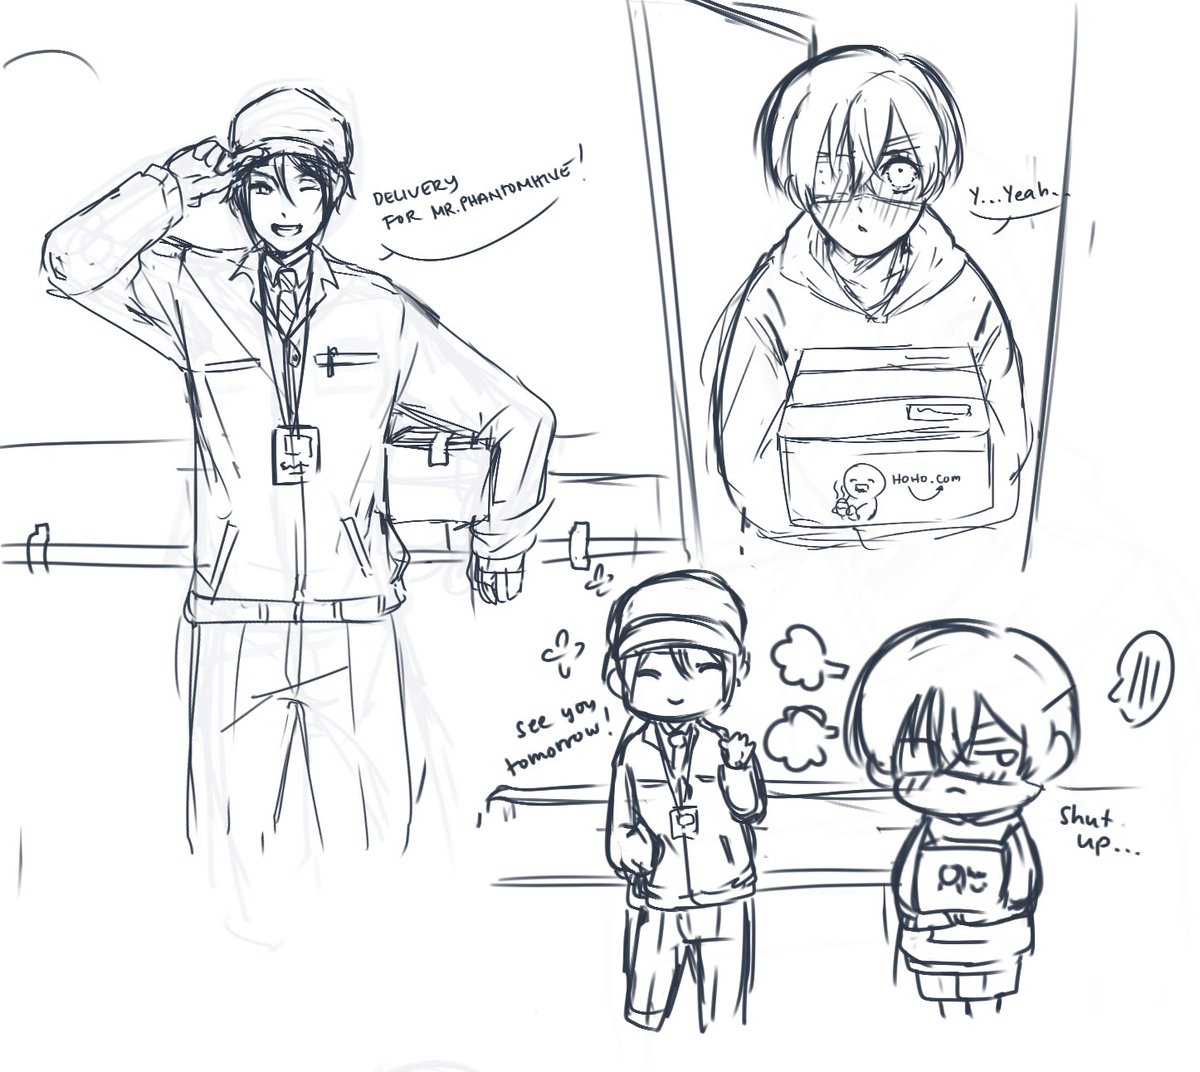 (⚠️messy doodle...I apologize)
Sebastian is a delivery man and Ciel orders from amazon every day so he can see Sebastian 